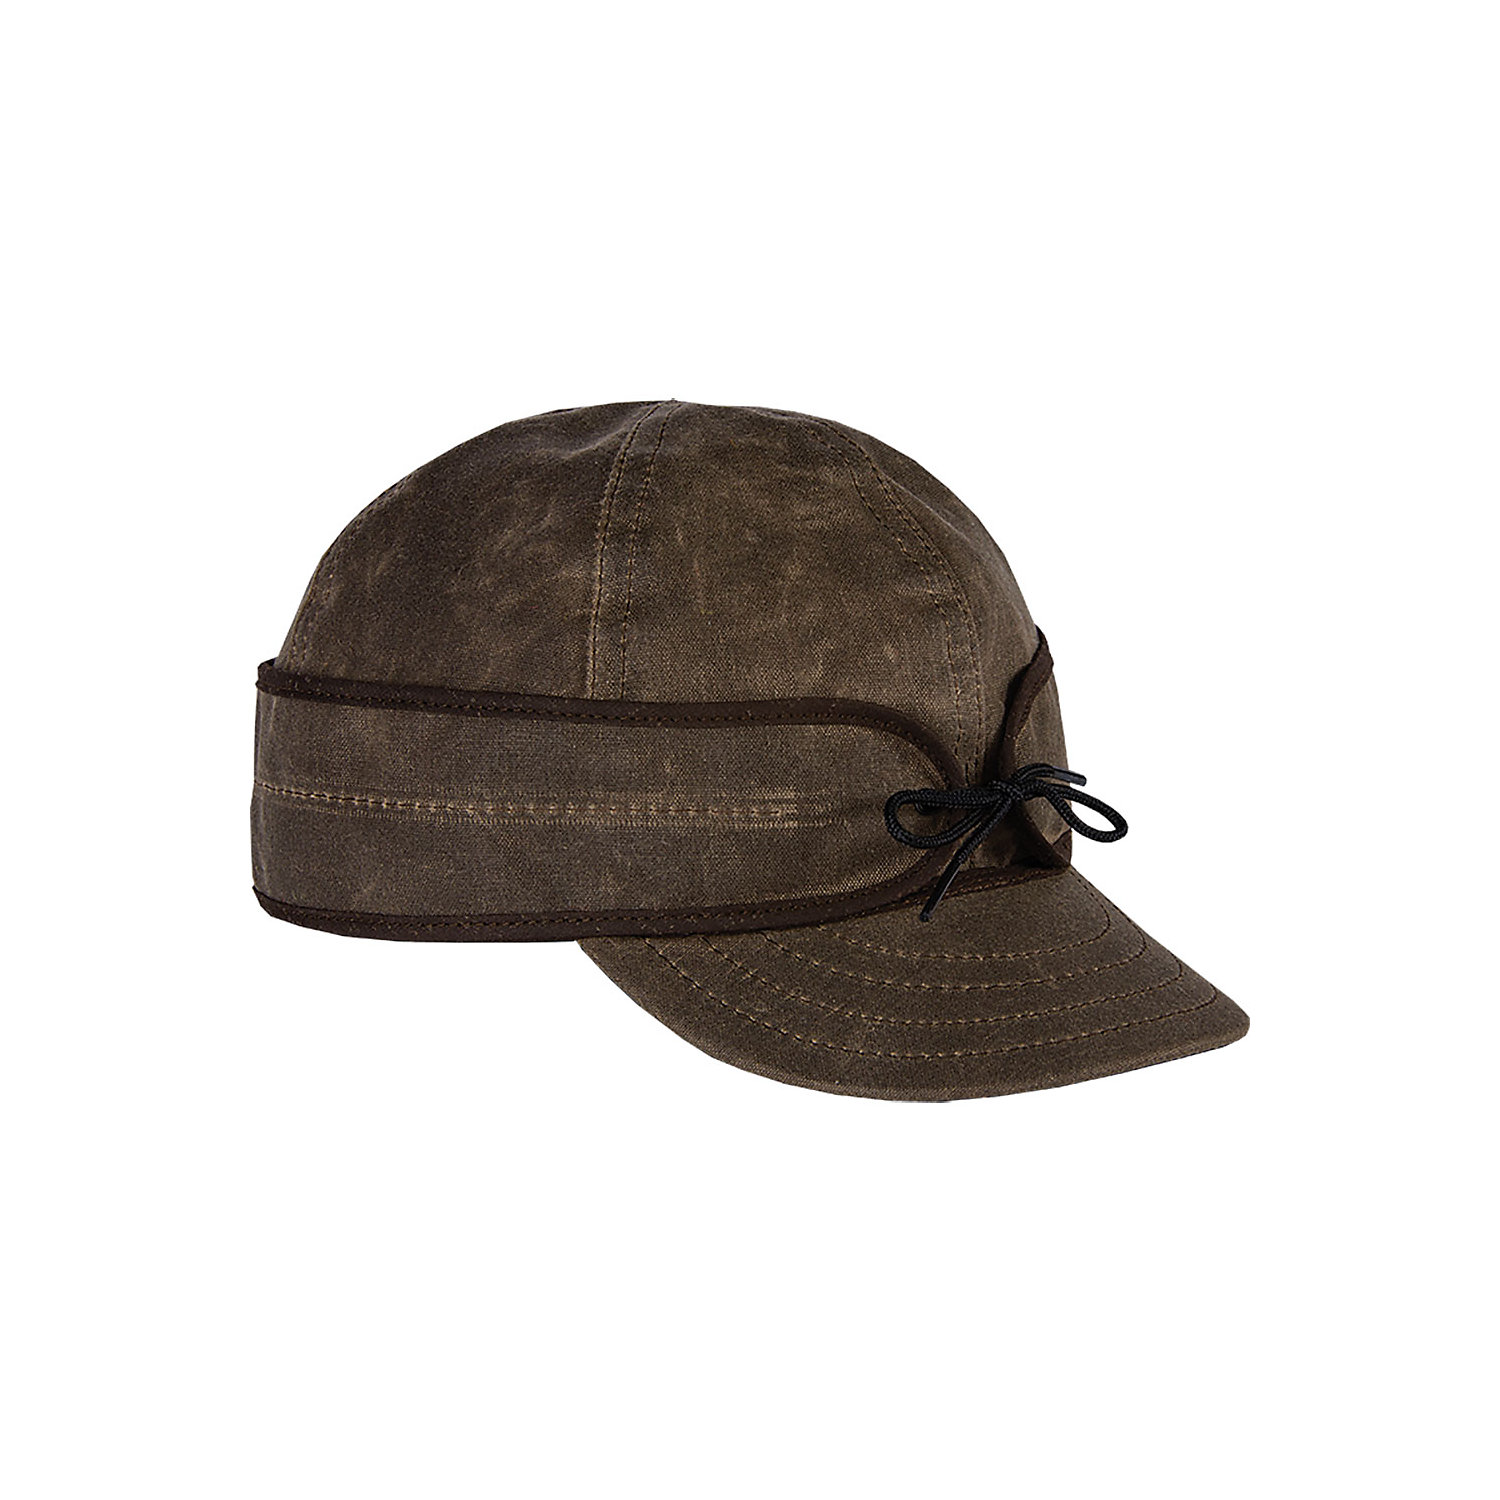 Stormy Kromer The Insulated Waxed Cotton Cap